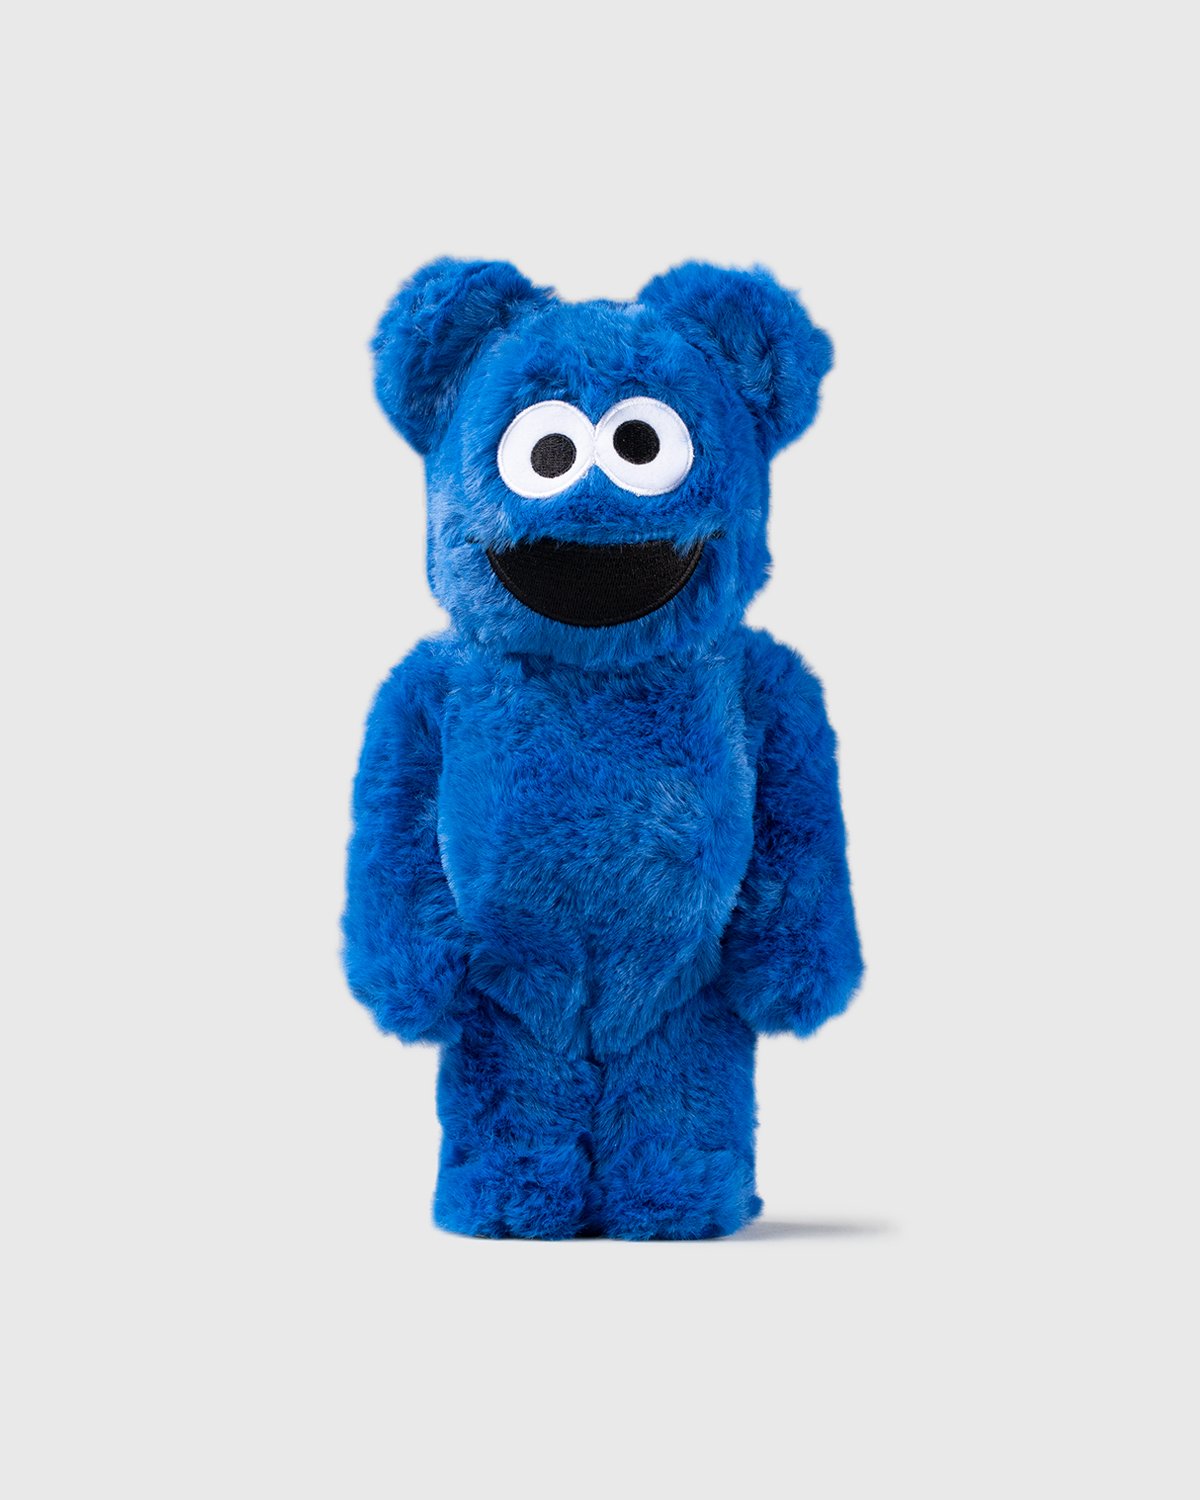 Medicom - Be@rbrick Cookie Monster Costume 400% Blue - Arts & Collectibles - Blue - Image 1